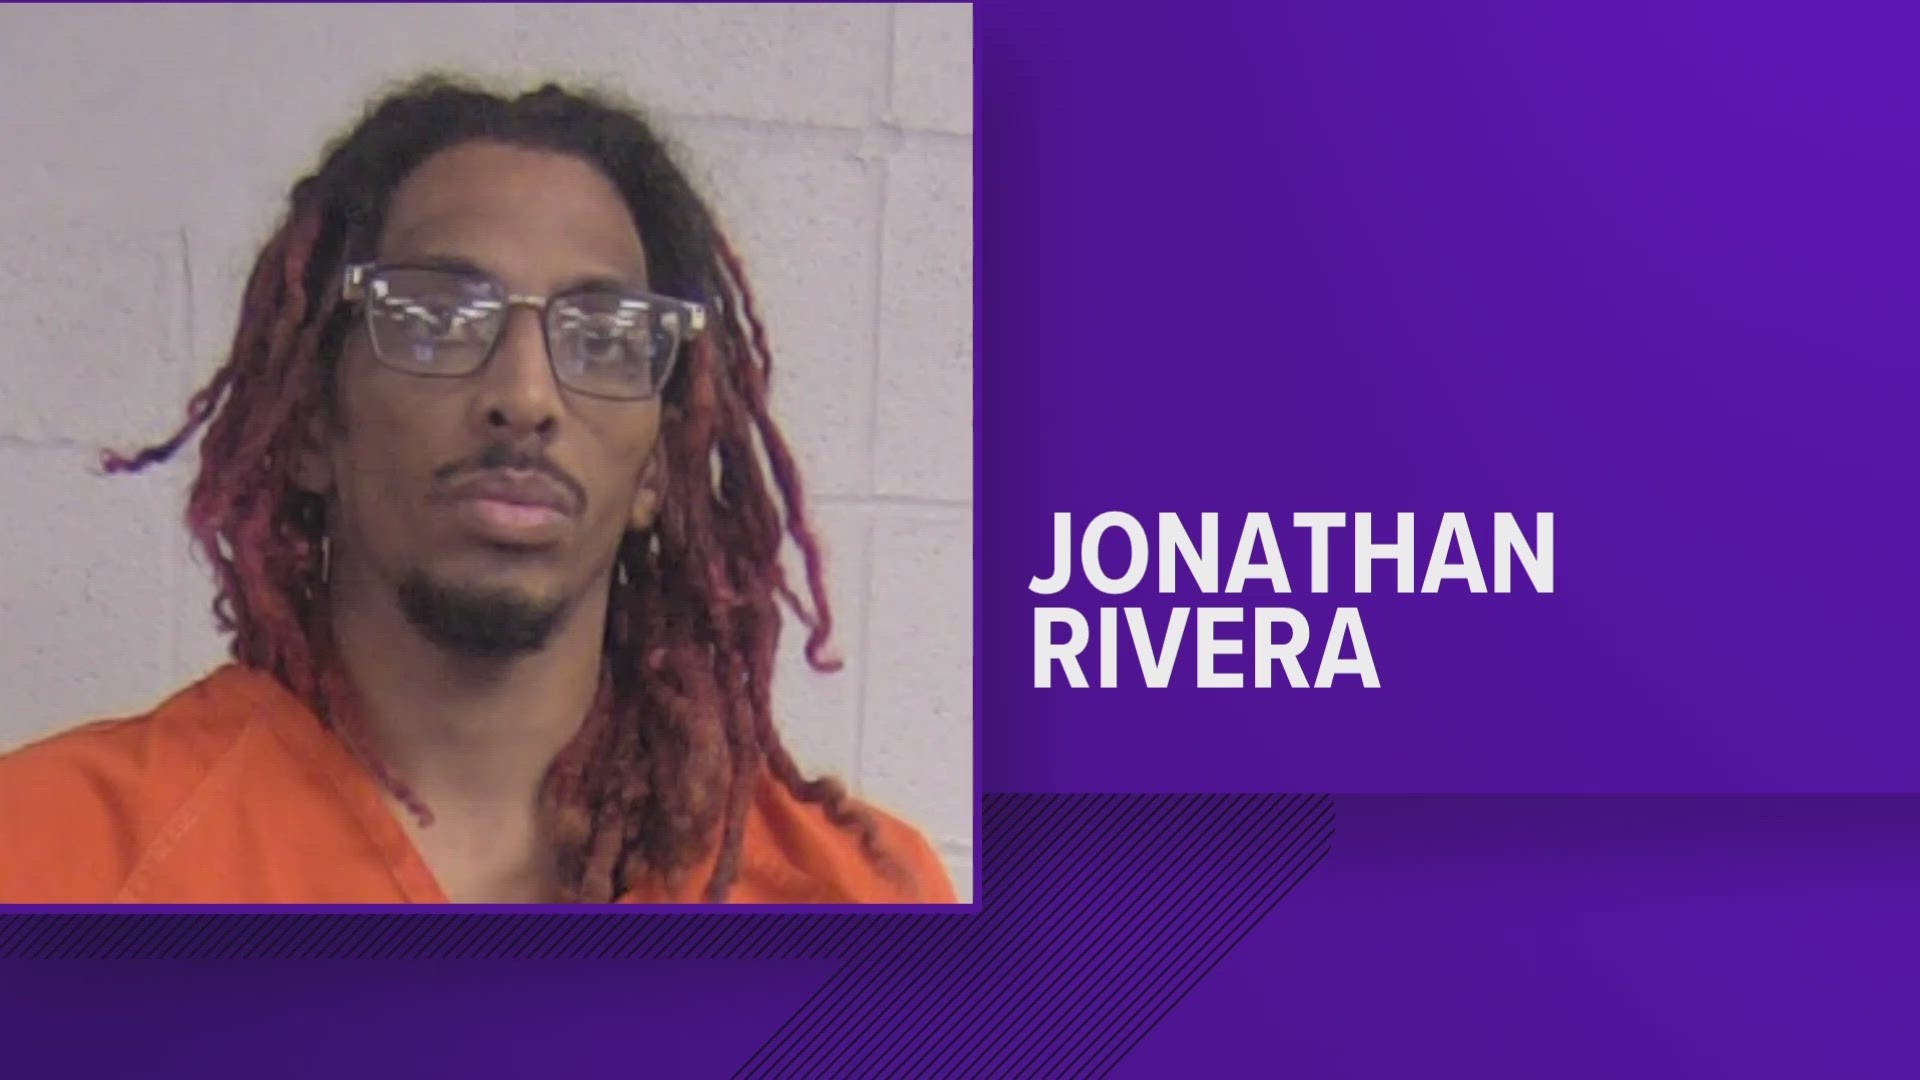 The U-S Attorney's Office says a federal grand jury indicted Jonathan Rivera for possession of a gun by a convicted felon.